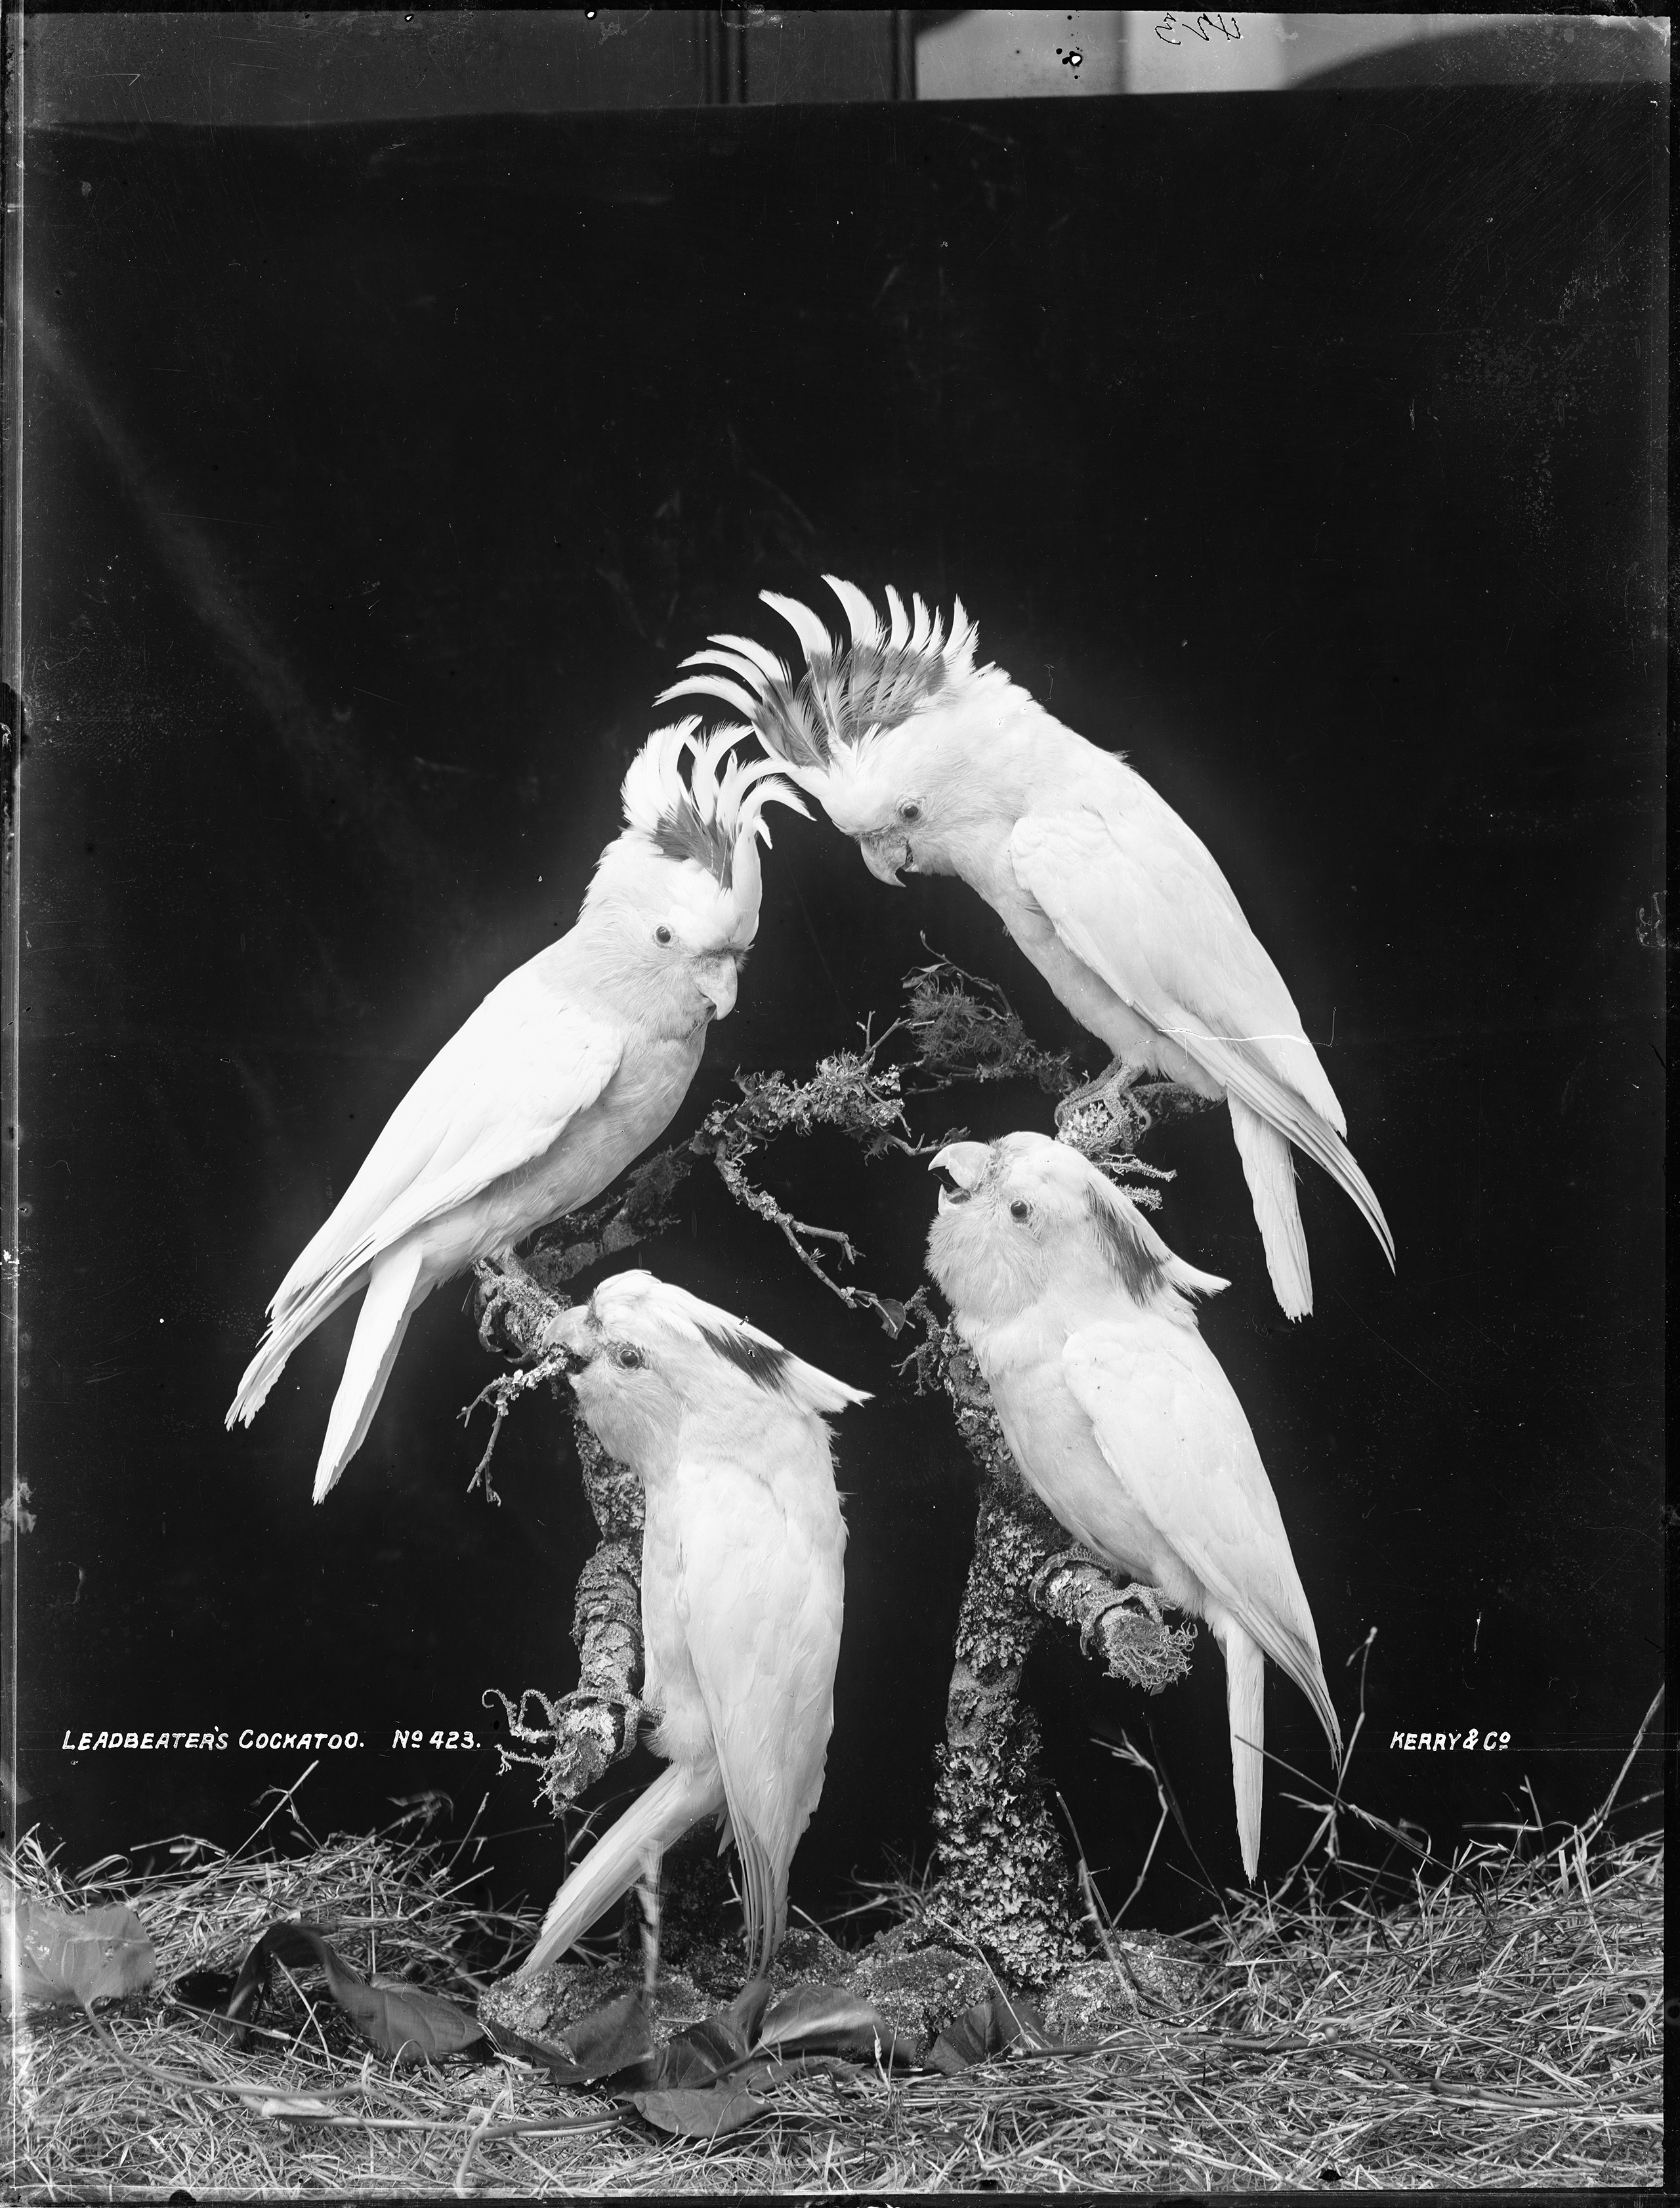 'Leadbeaters Cockatoo'by Kerry and Co from the Tyrrell Collection